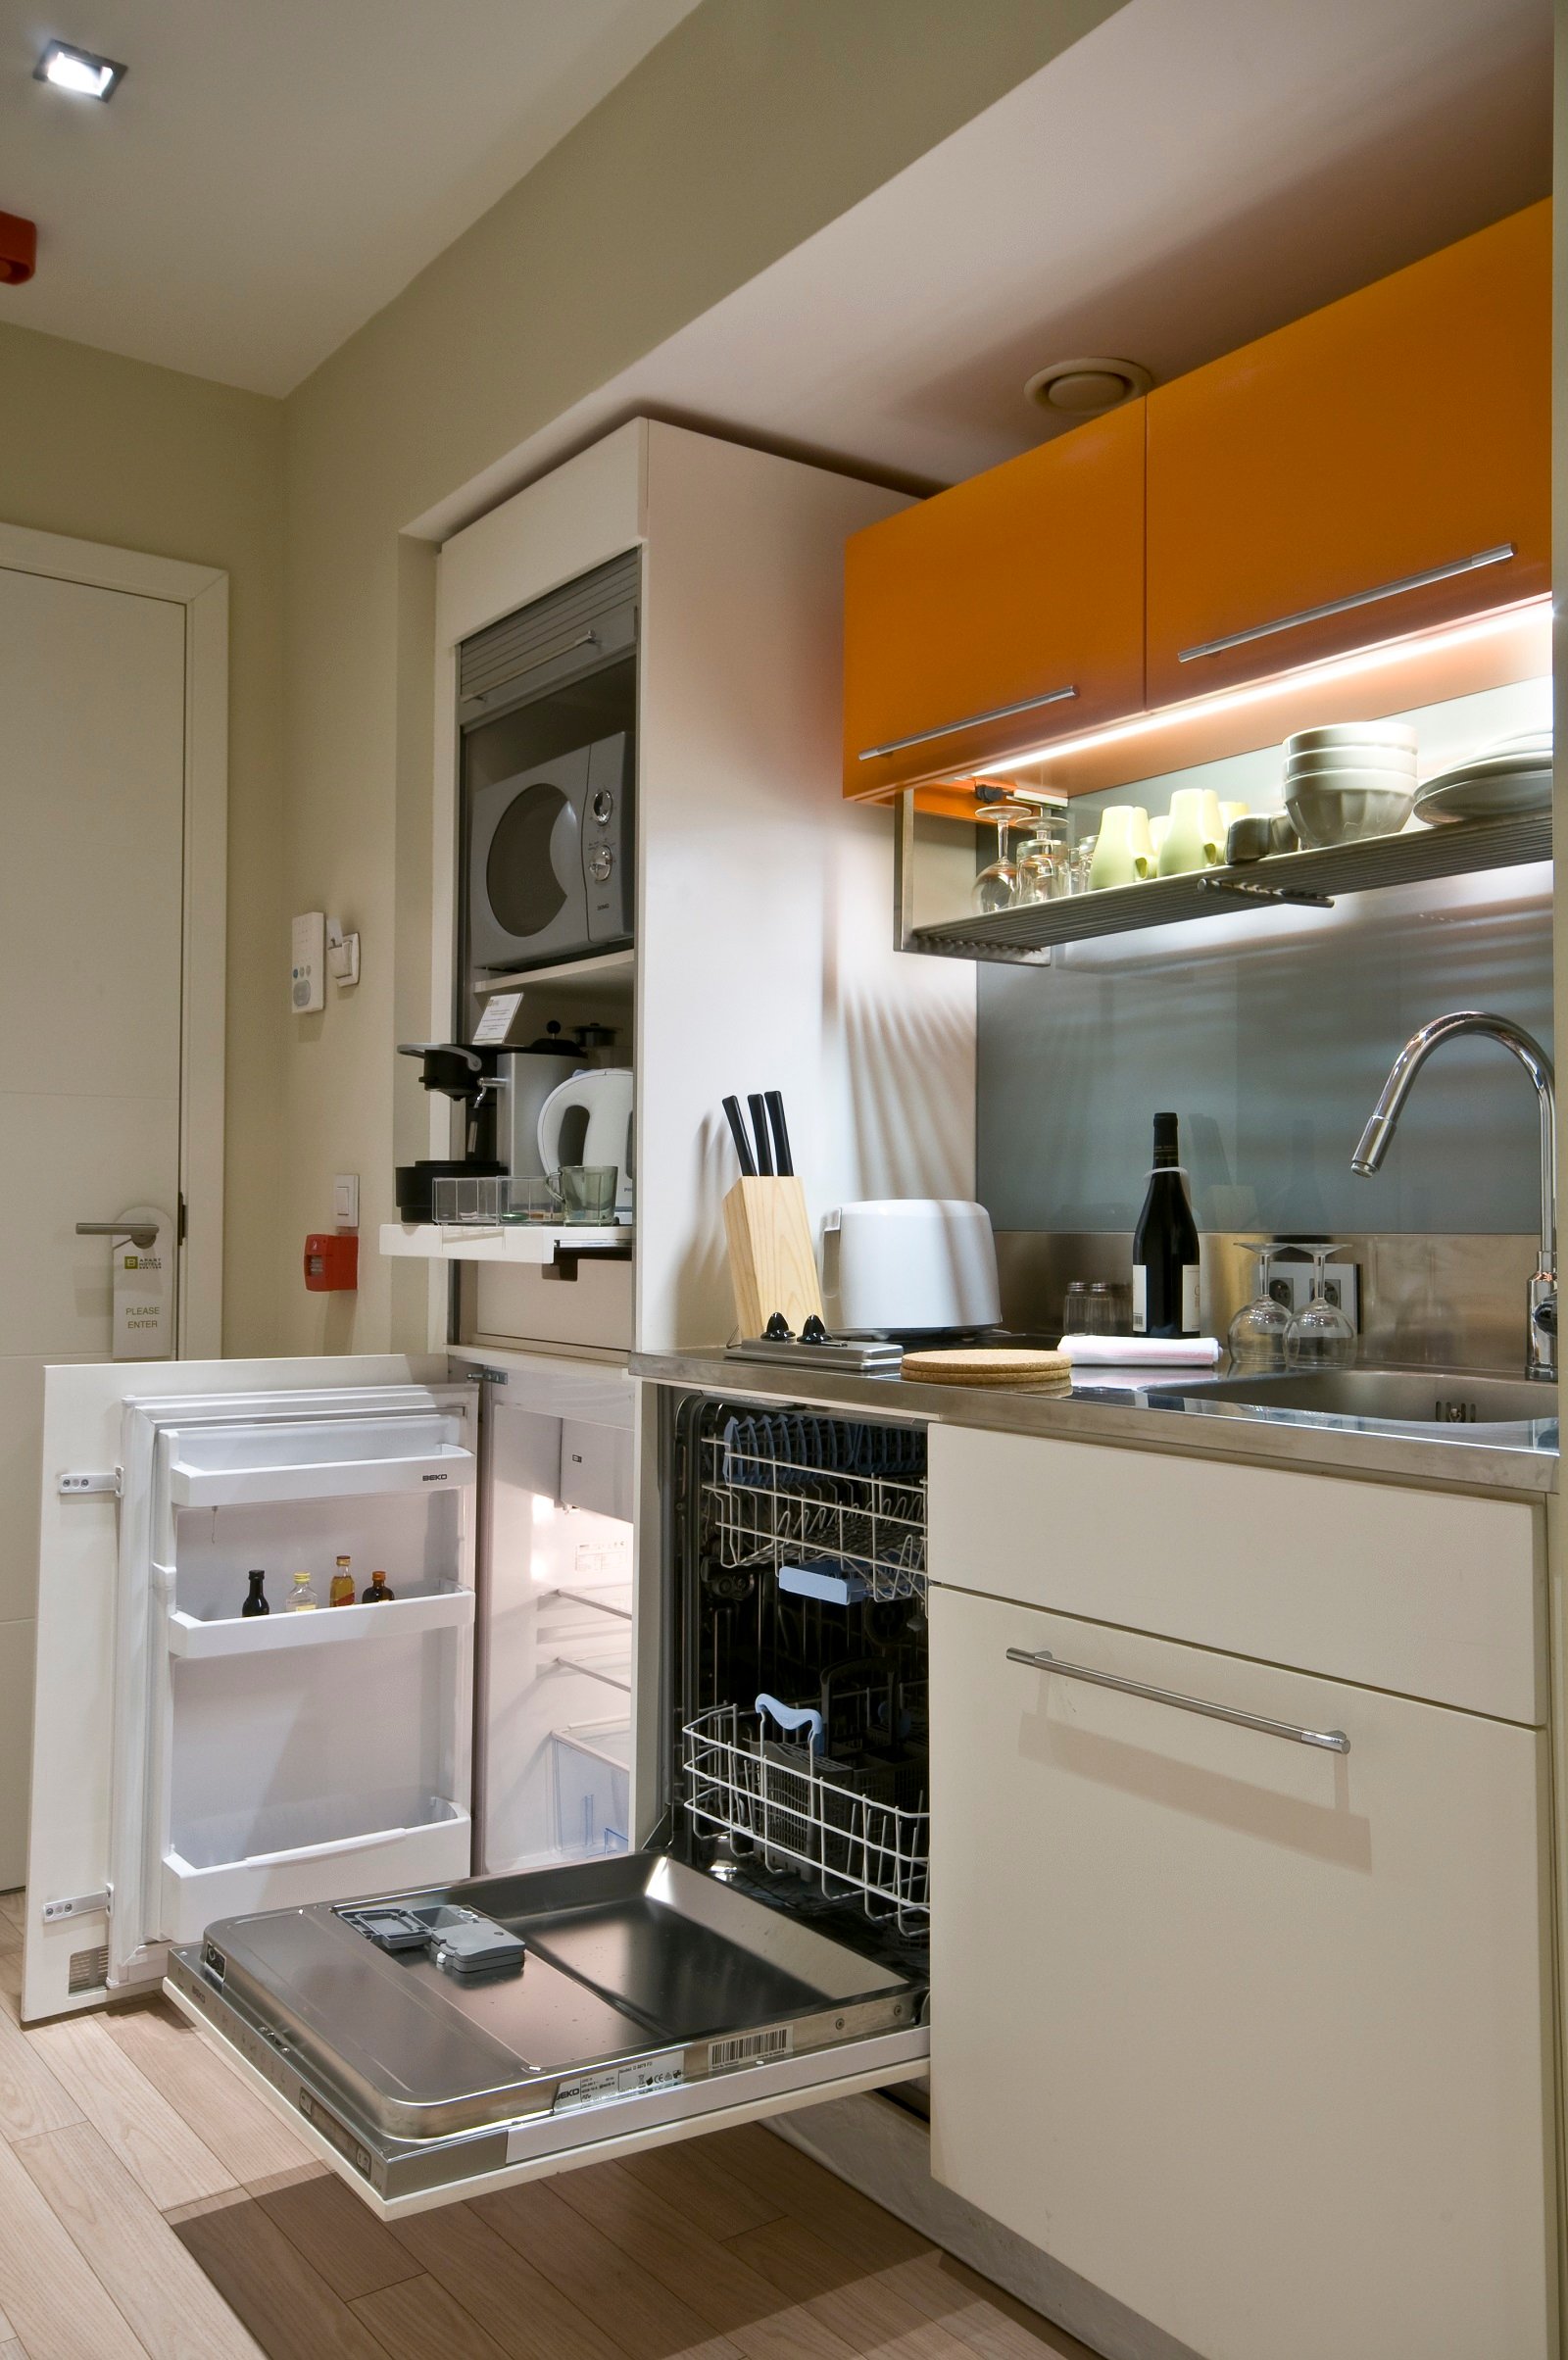 104/Grand-Place/Grand Place - Kitchen Apartment.jpg